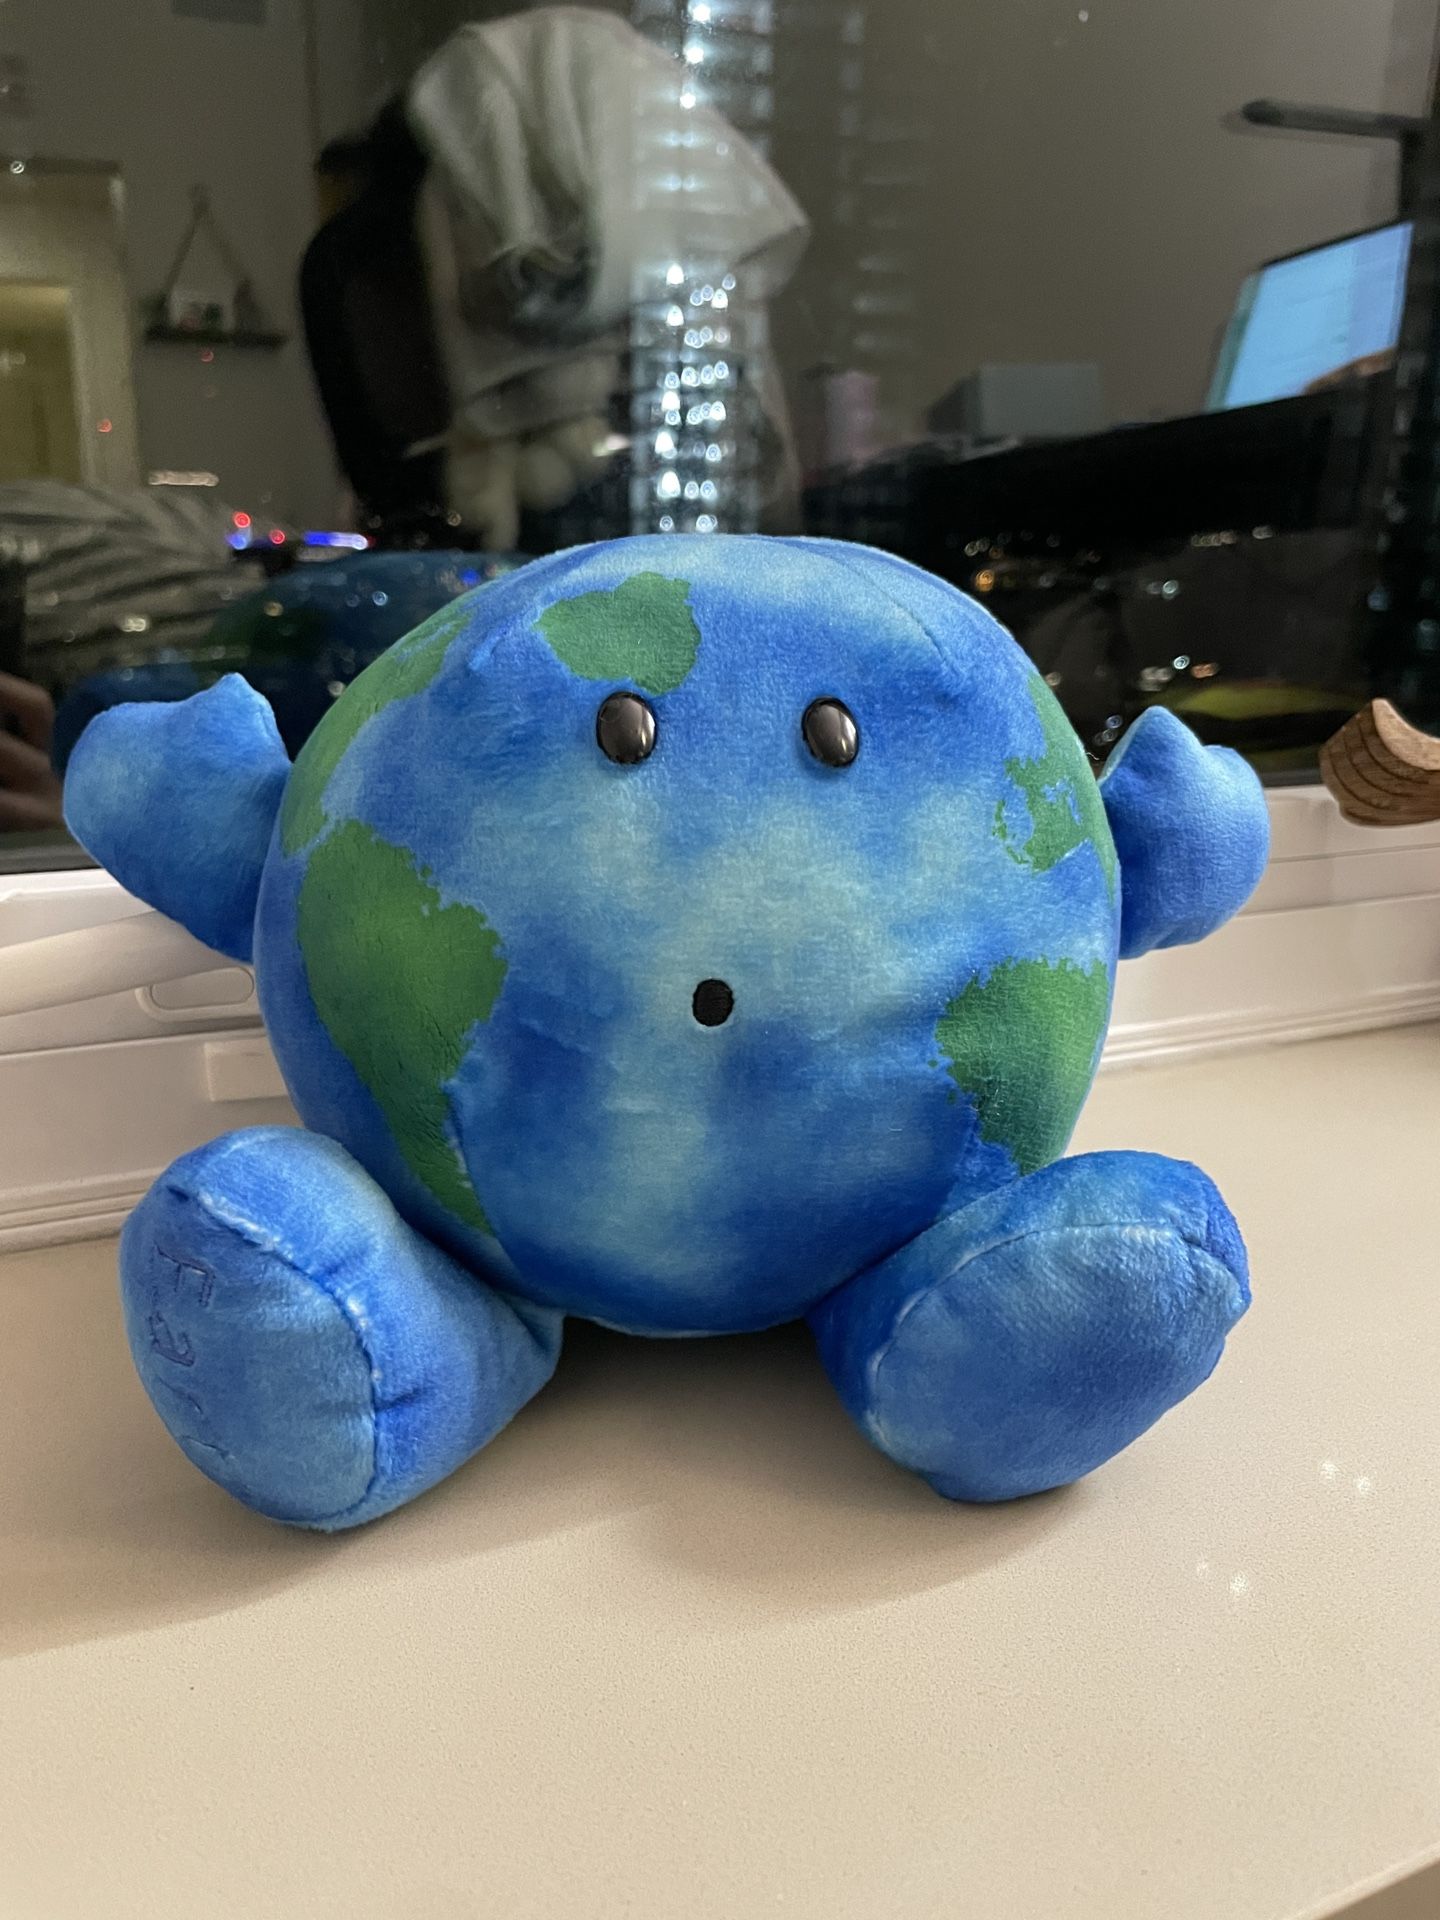 Celestial Buddies Earth Buddy Learning Science Astronomy Space Solar System Educational Plush Toy space x gift for kids